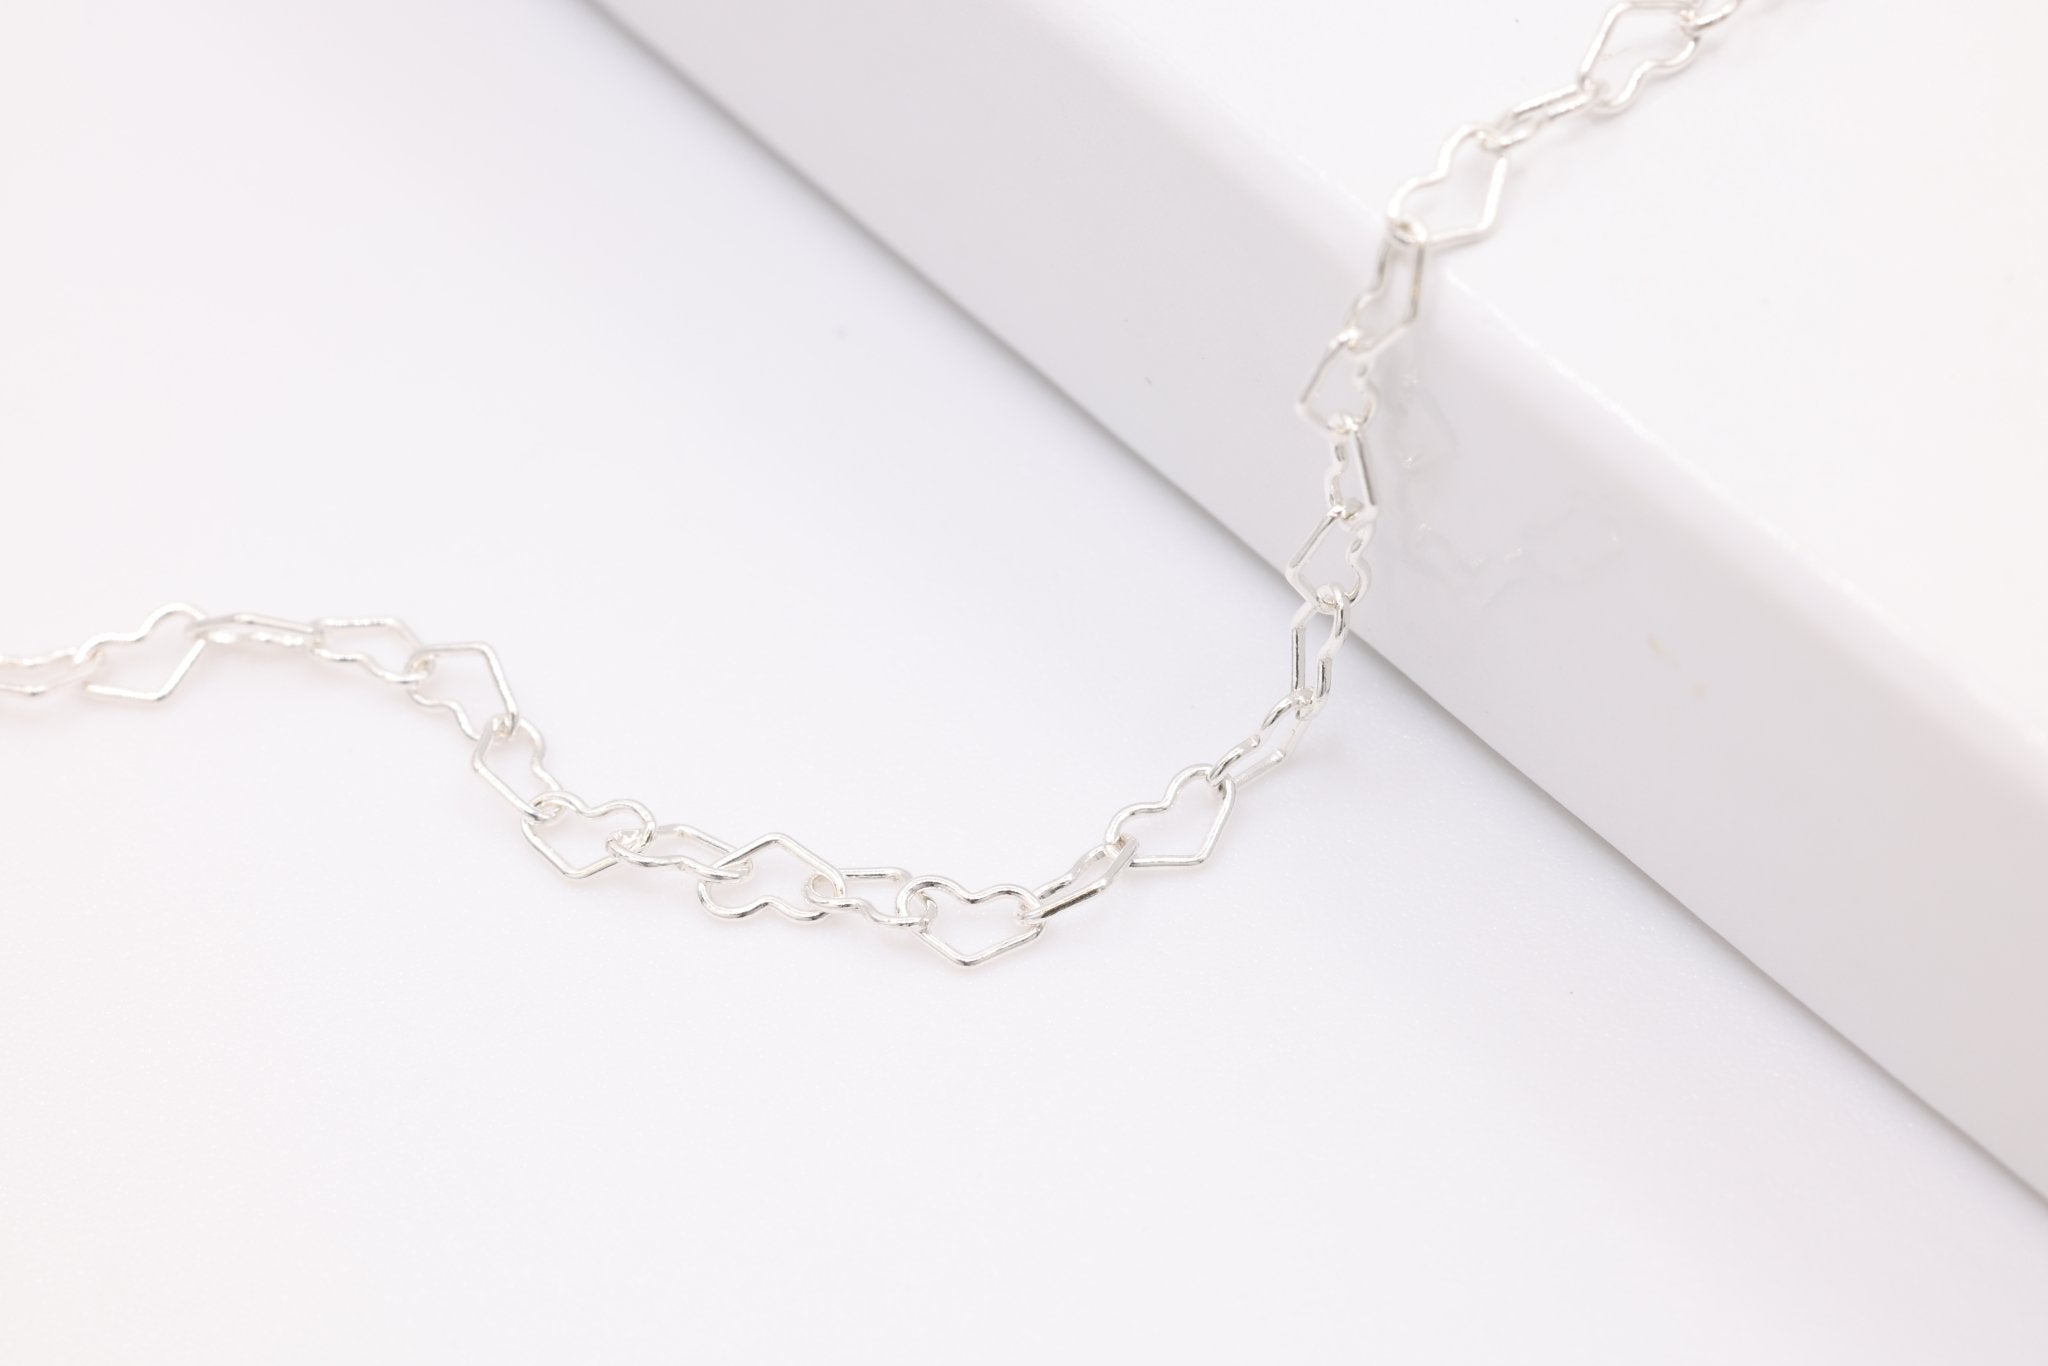 3mm x 2mm Heart Chain, Sterling Silver, Heart Cable Chain Wholesale Jewelry Making - HarperCrown